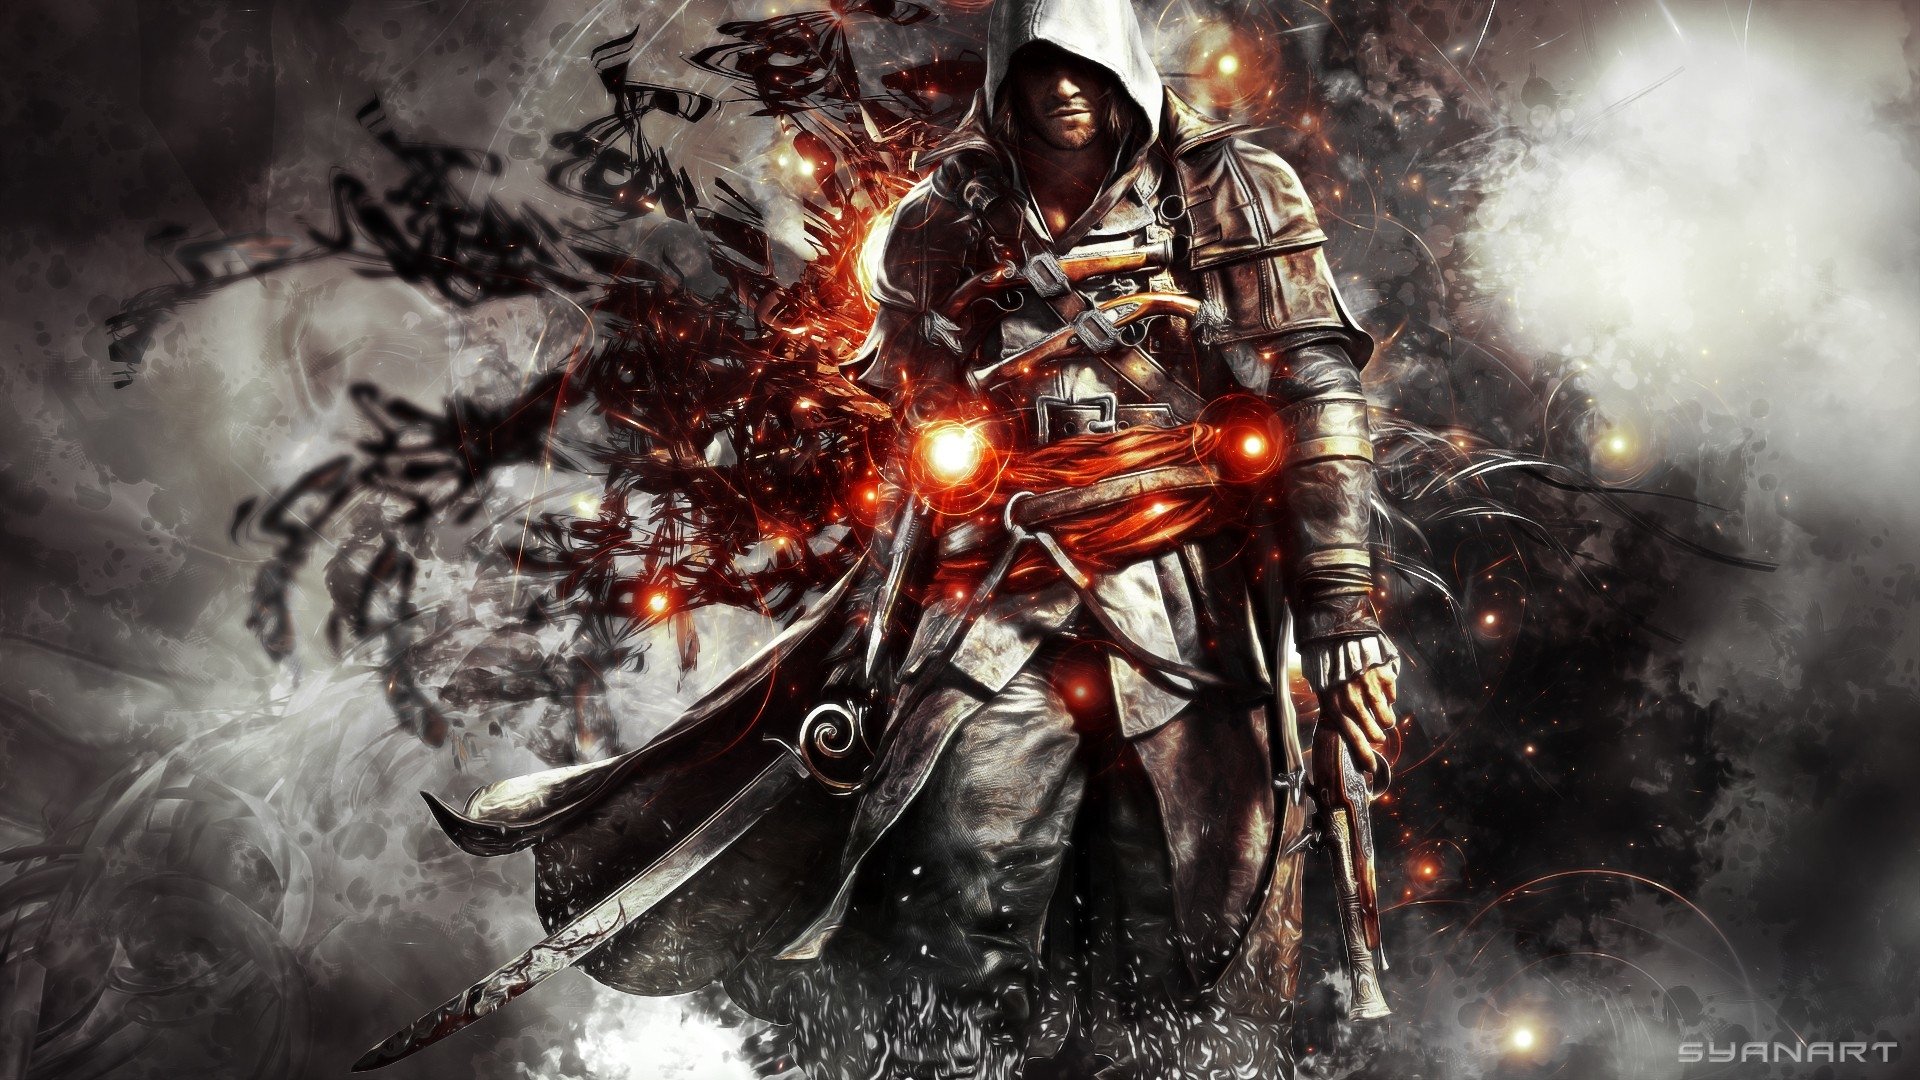 Assassin's Creed Images Hd Download - HD Wallpaper 